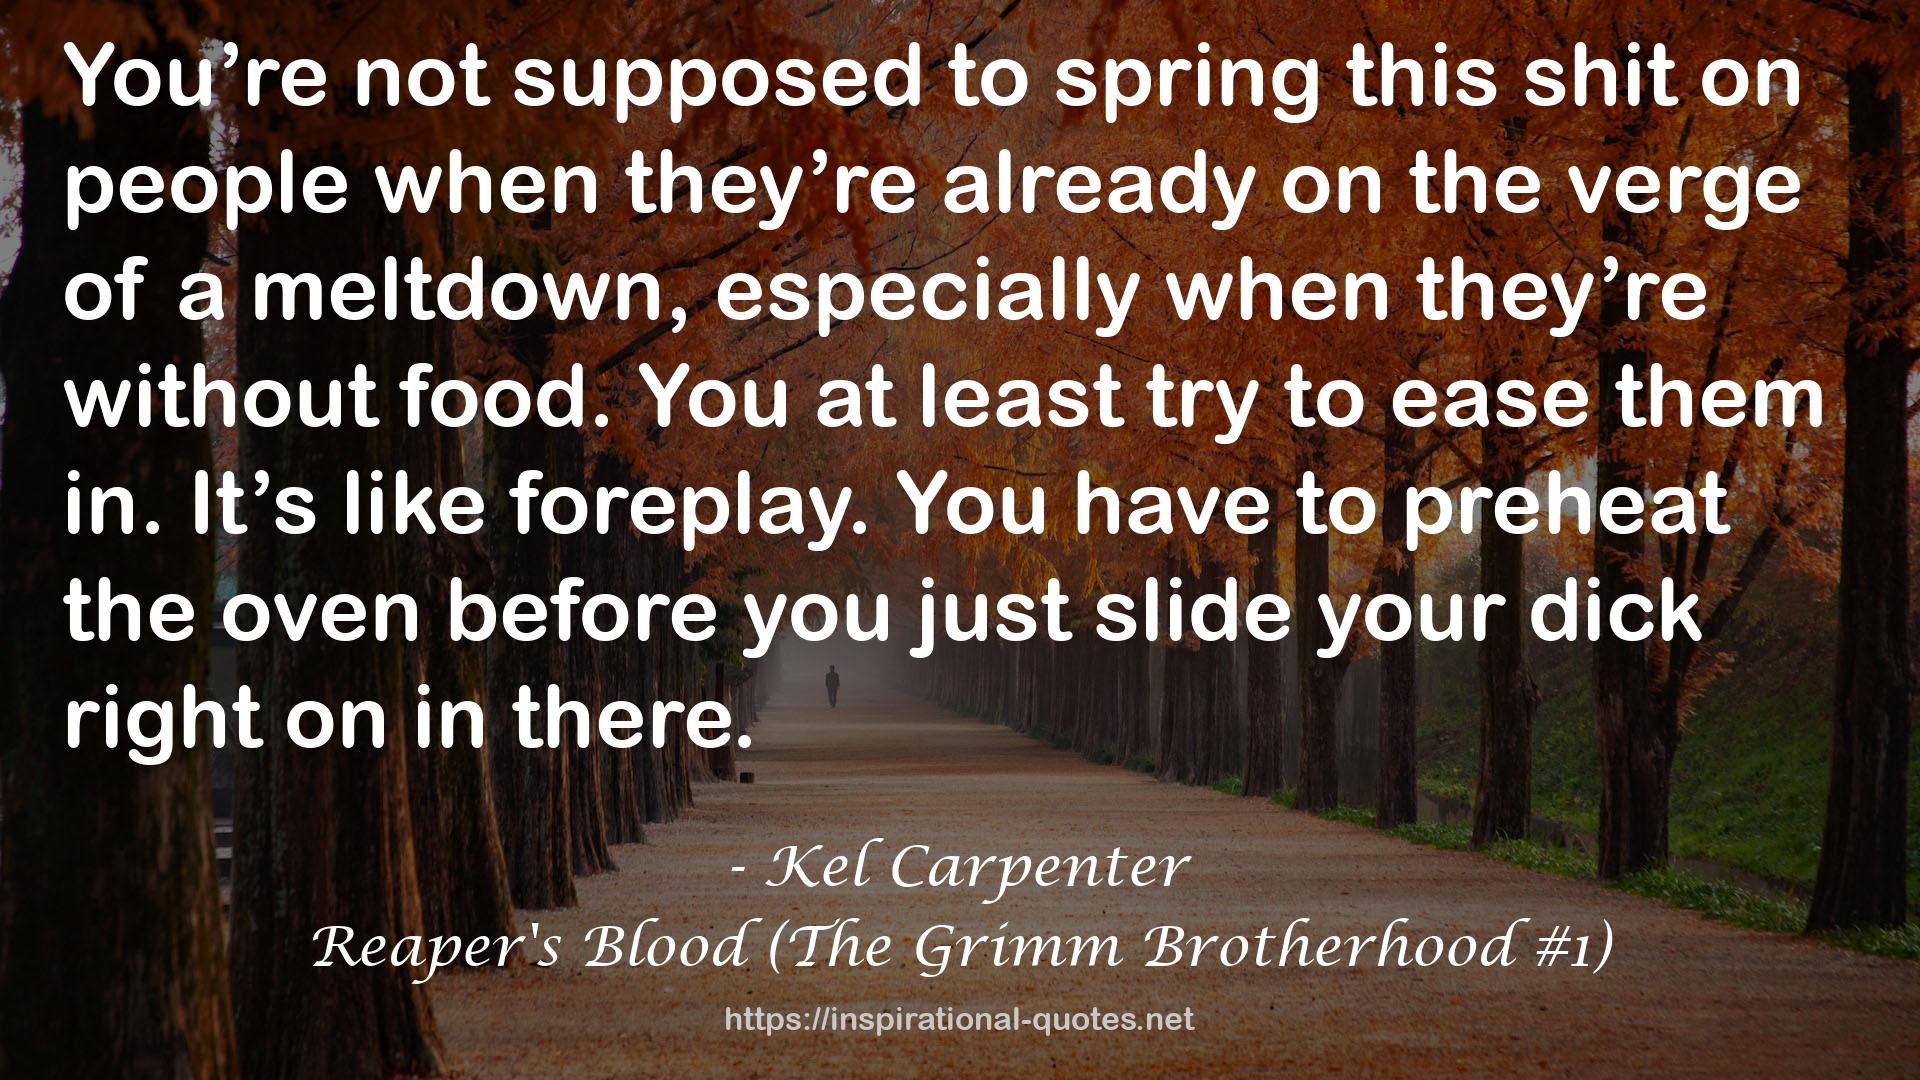 Reaper's Blood (The Grimm Brotherhood #1) QUOTES